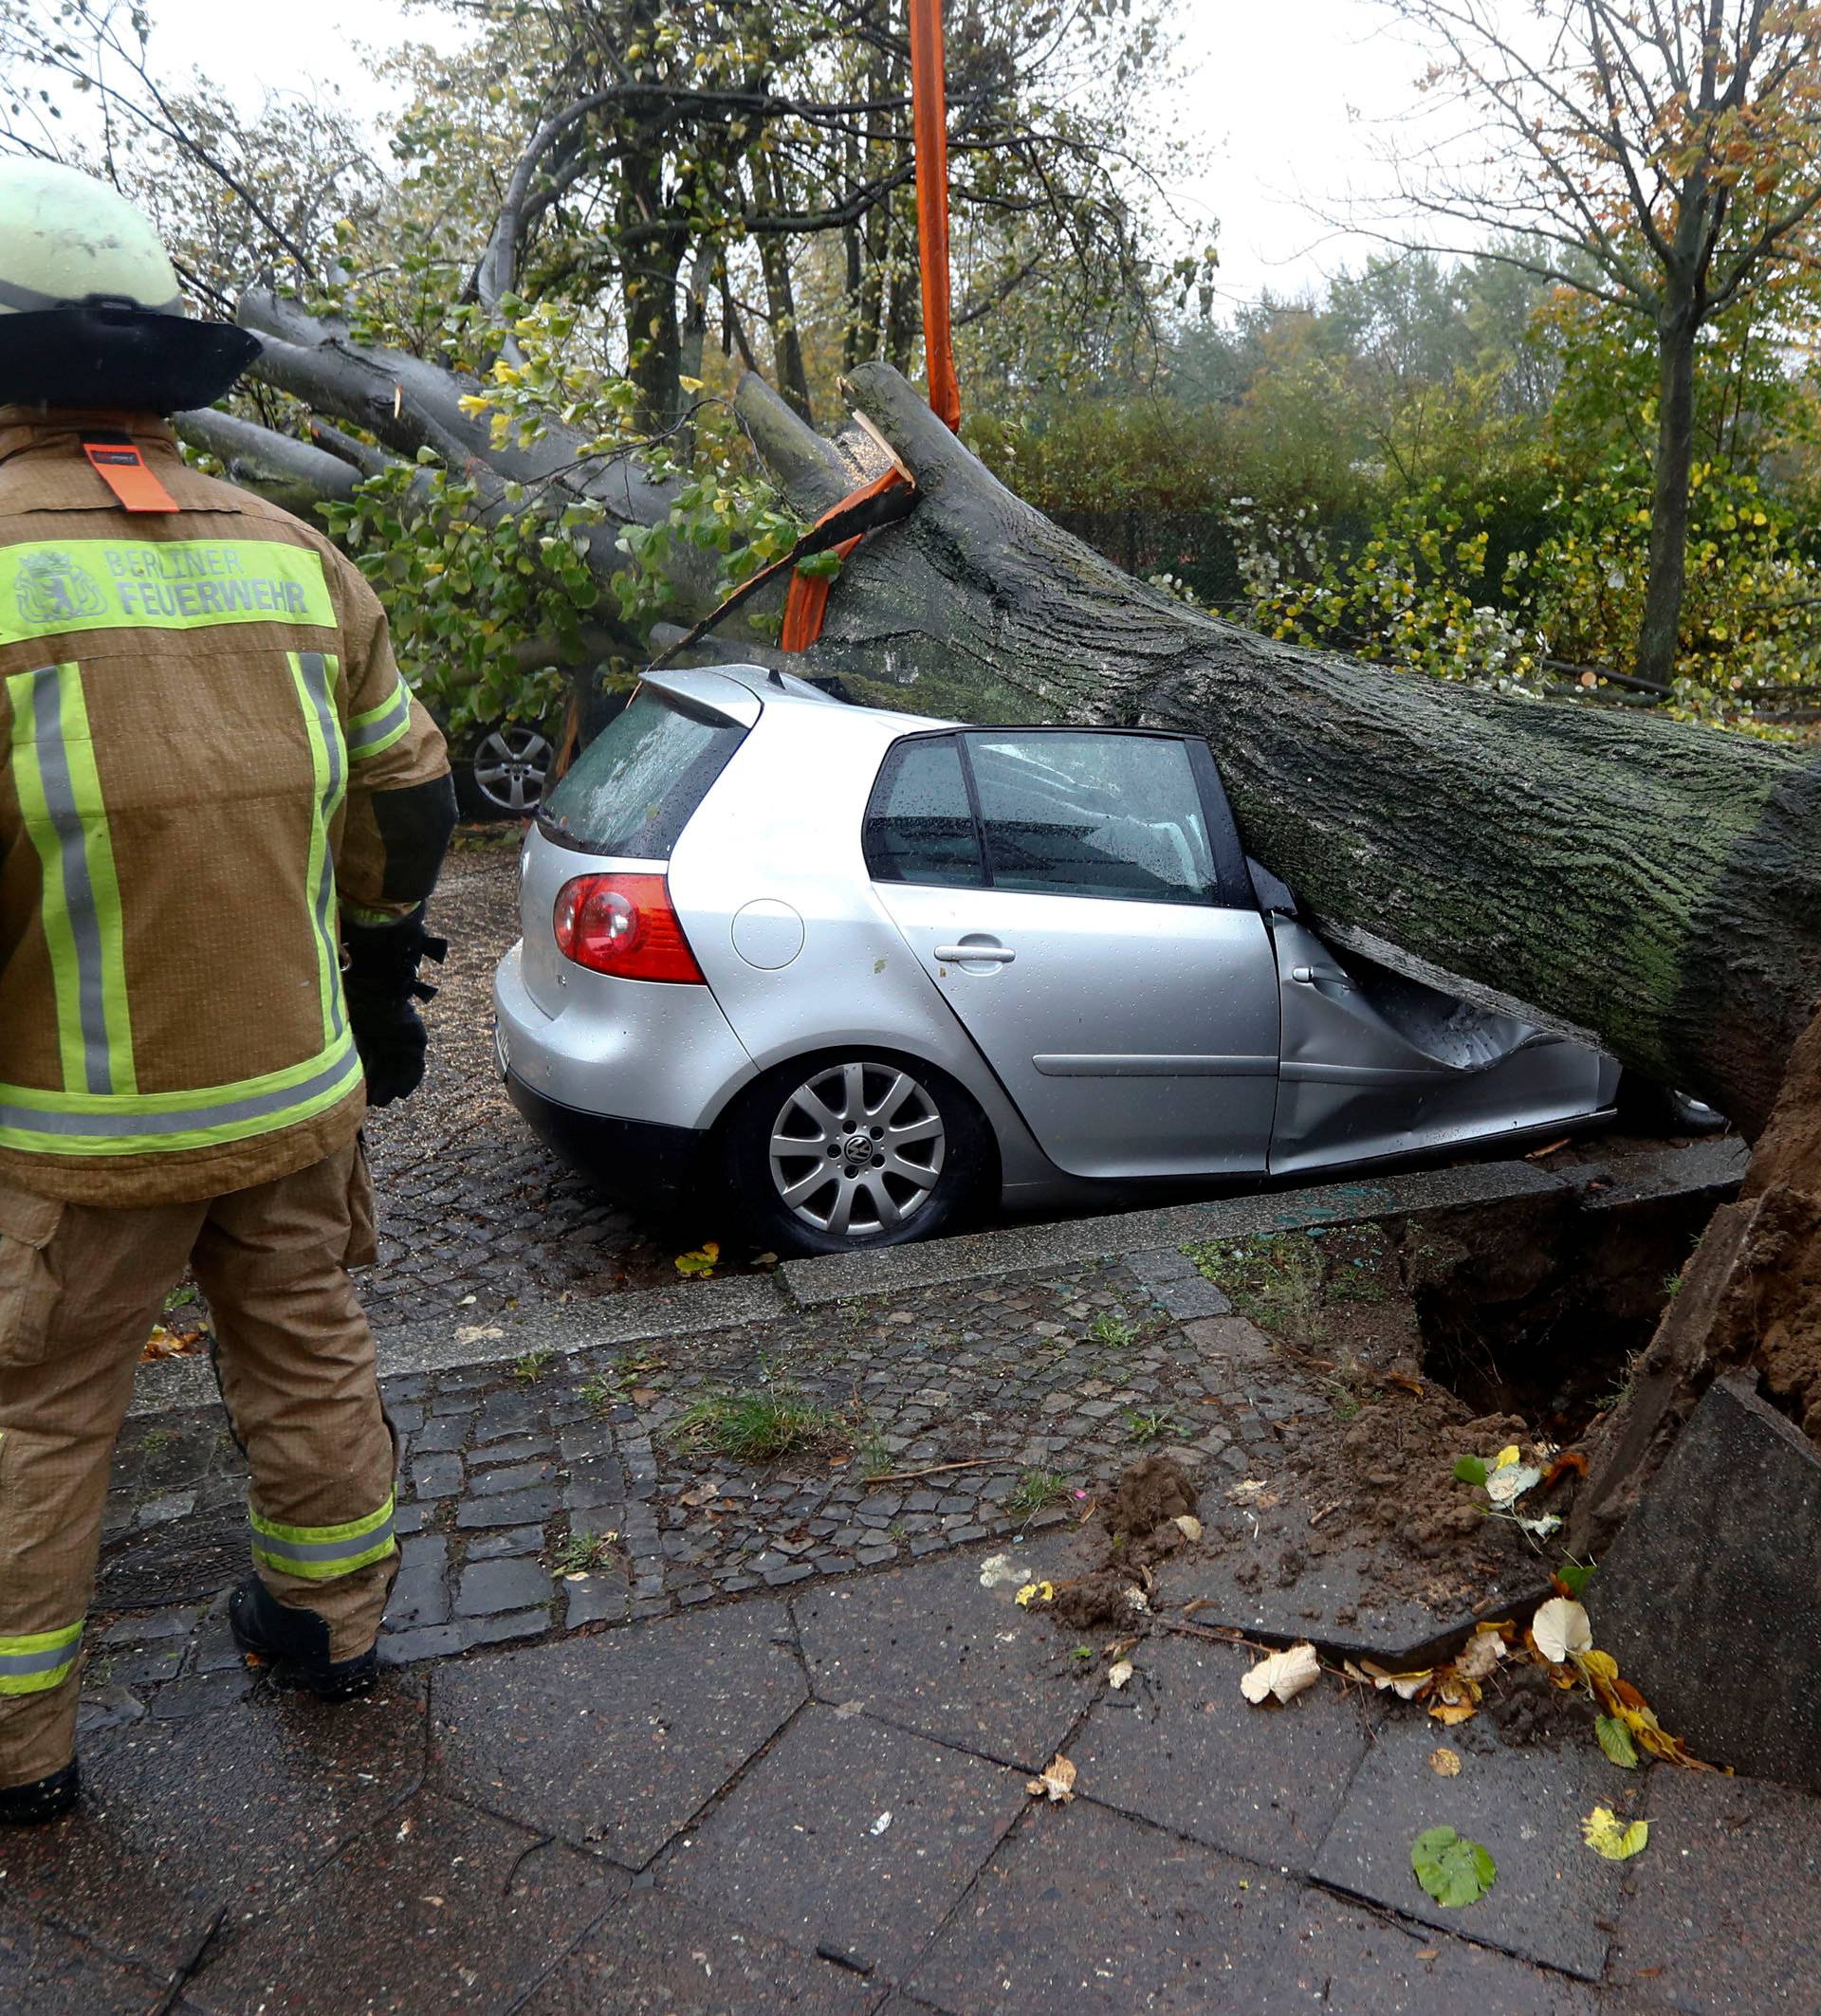 Firefighters are pictured next to a car damaged by a tree during stormy weather caused by storm called "Herwart" in Berlin